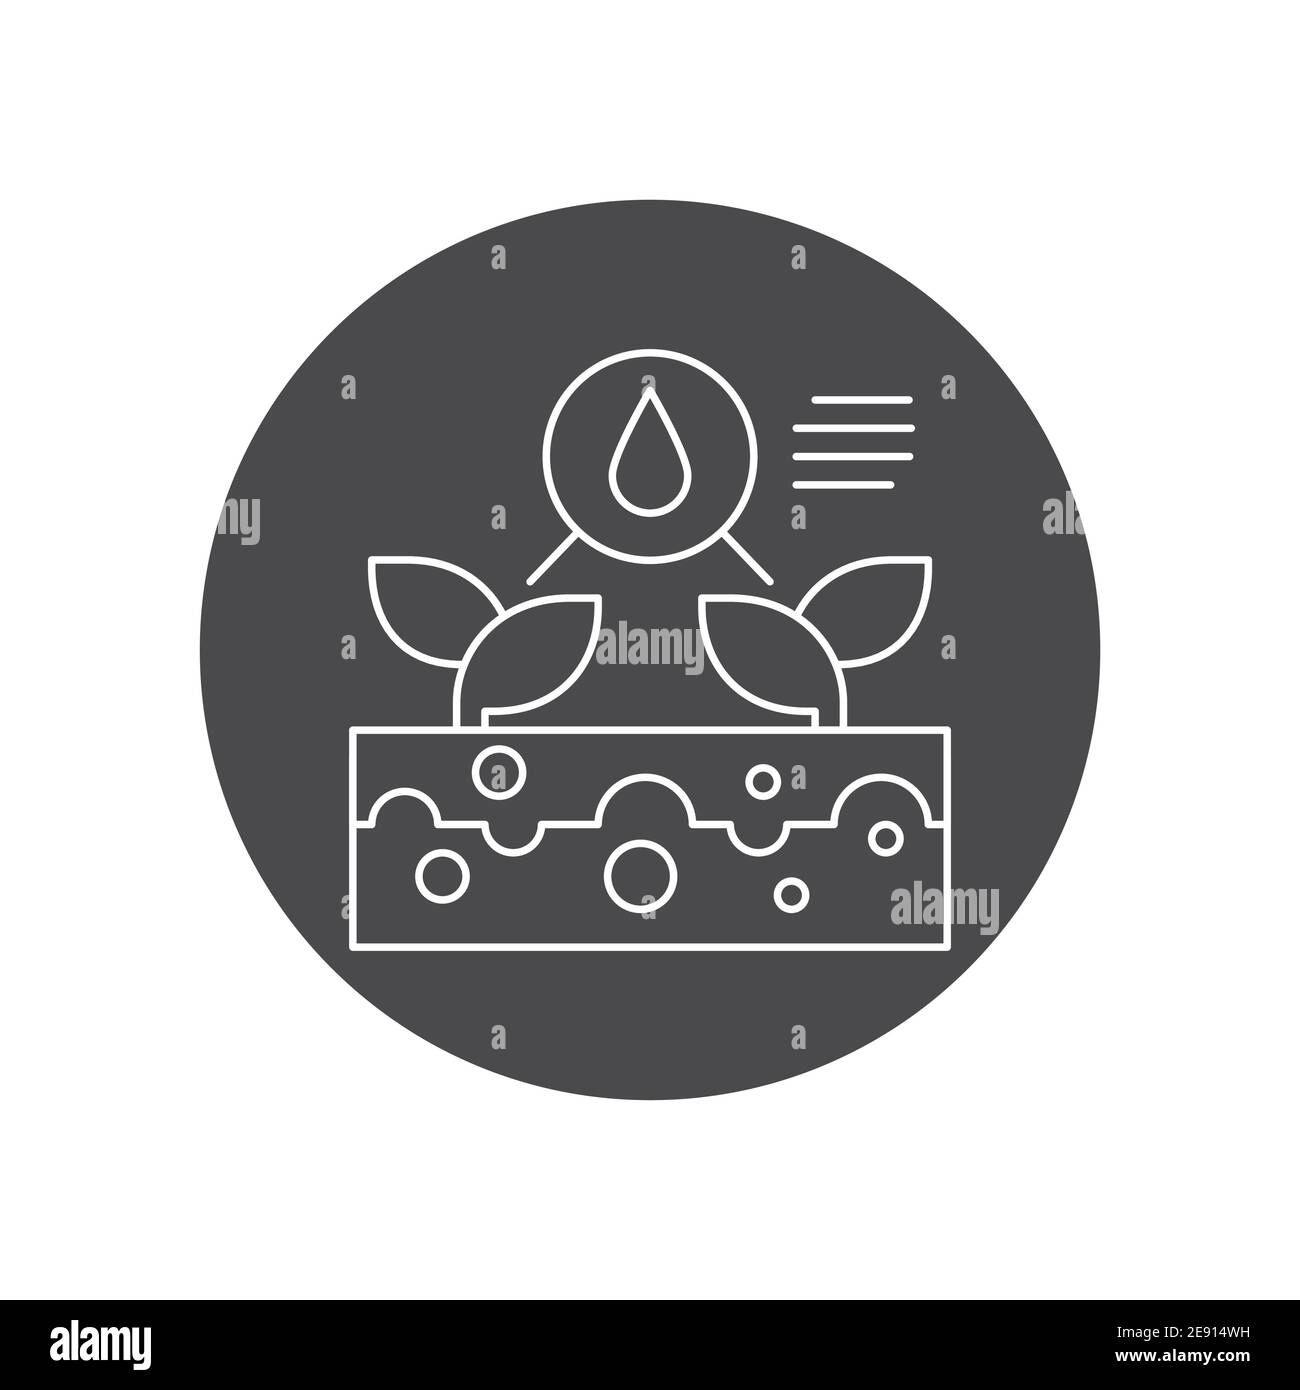 Smart farming black glyph icon. System monitoring the crop field with the help of sensors. Sign for web page, app. UI UX GUI design element. Editable Stock Vector